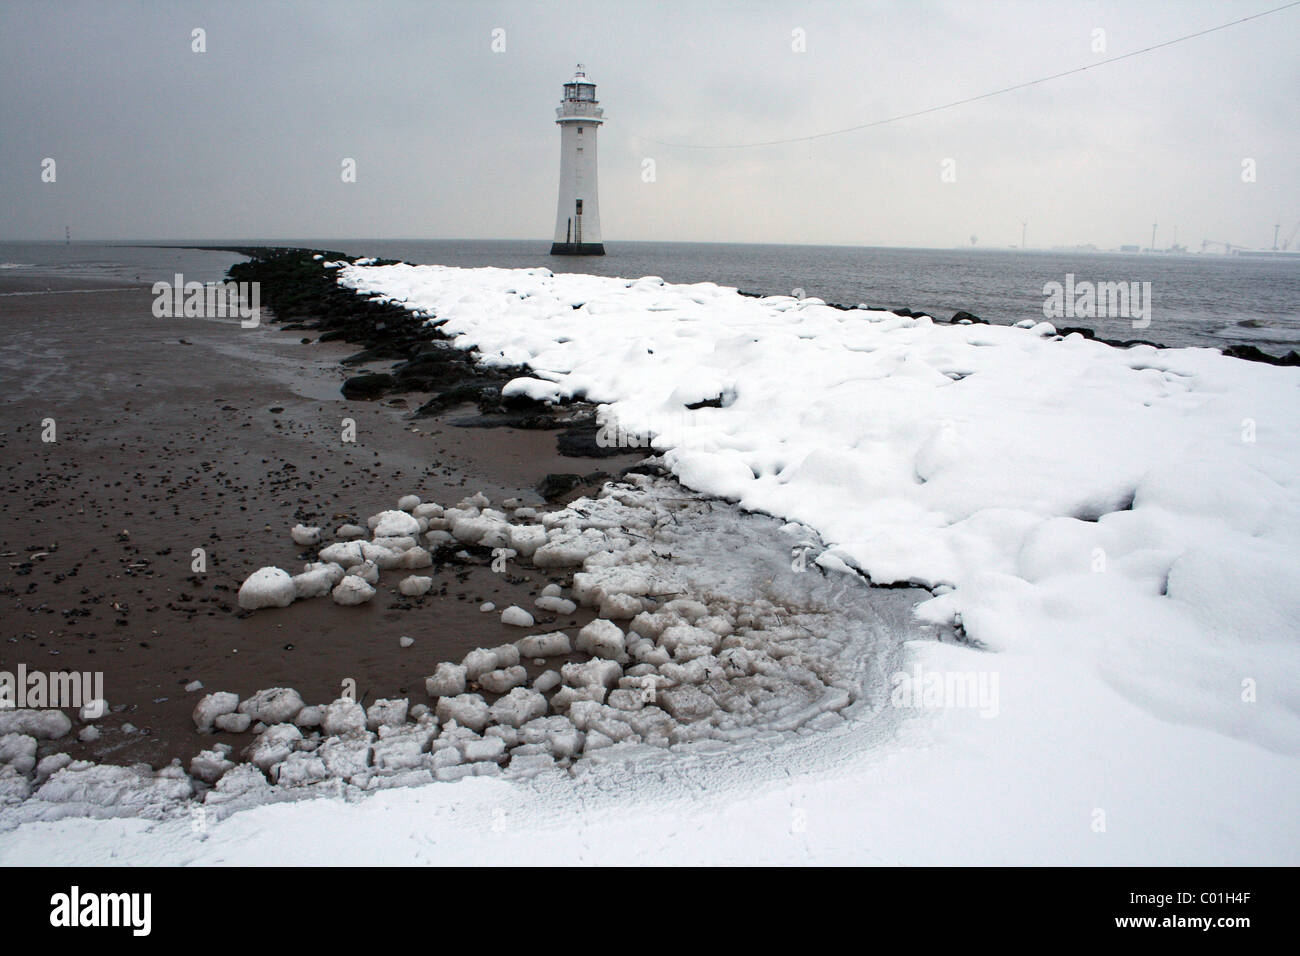 New Brighton Lighthouse And Snow Covered Sea Defence Groyne, Wallasey, The Wirral, Merseyside, UK Stock Photo